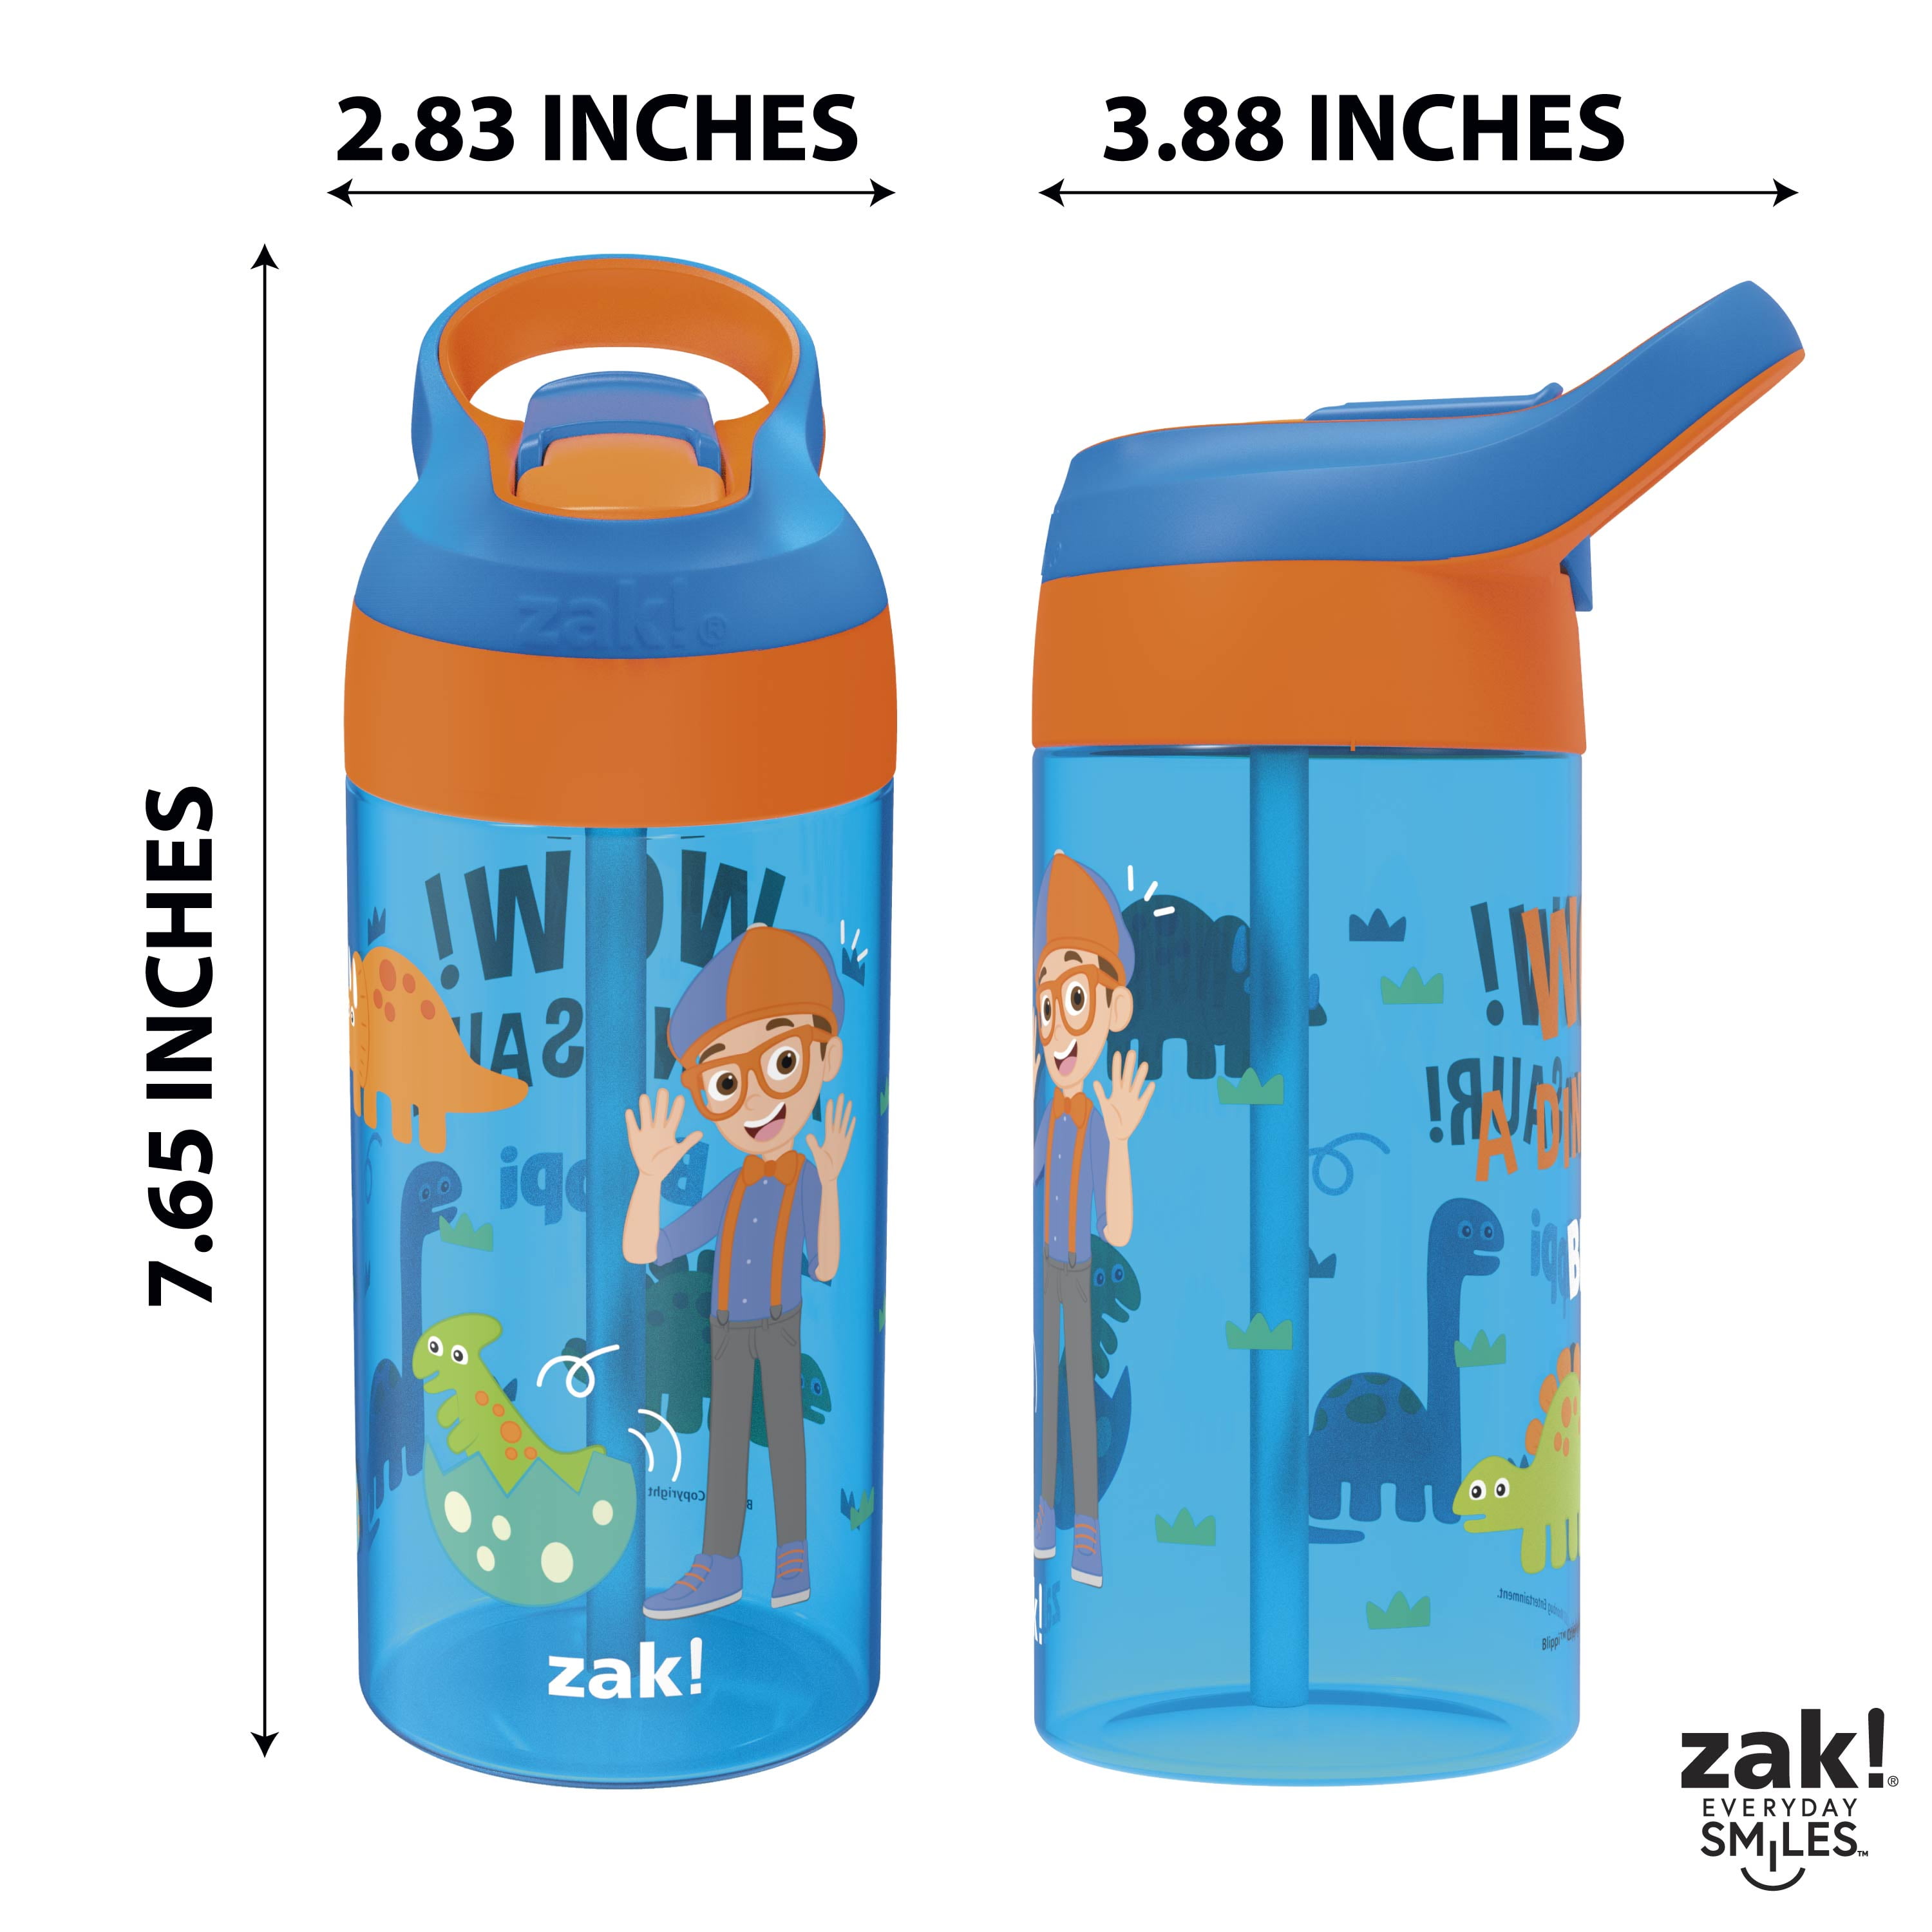 Hand Crafted, Other, Blippi Stainless Steel Kids Water Bottle